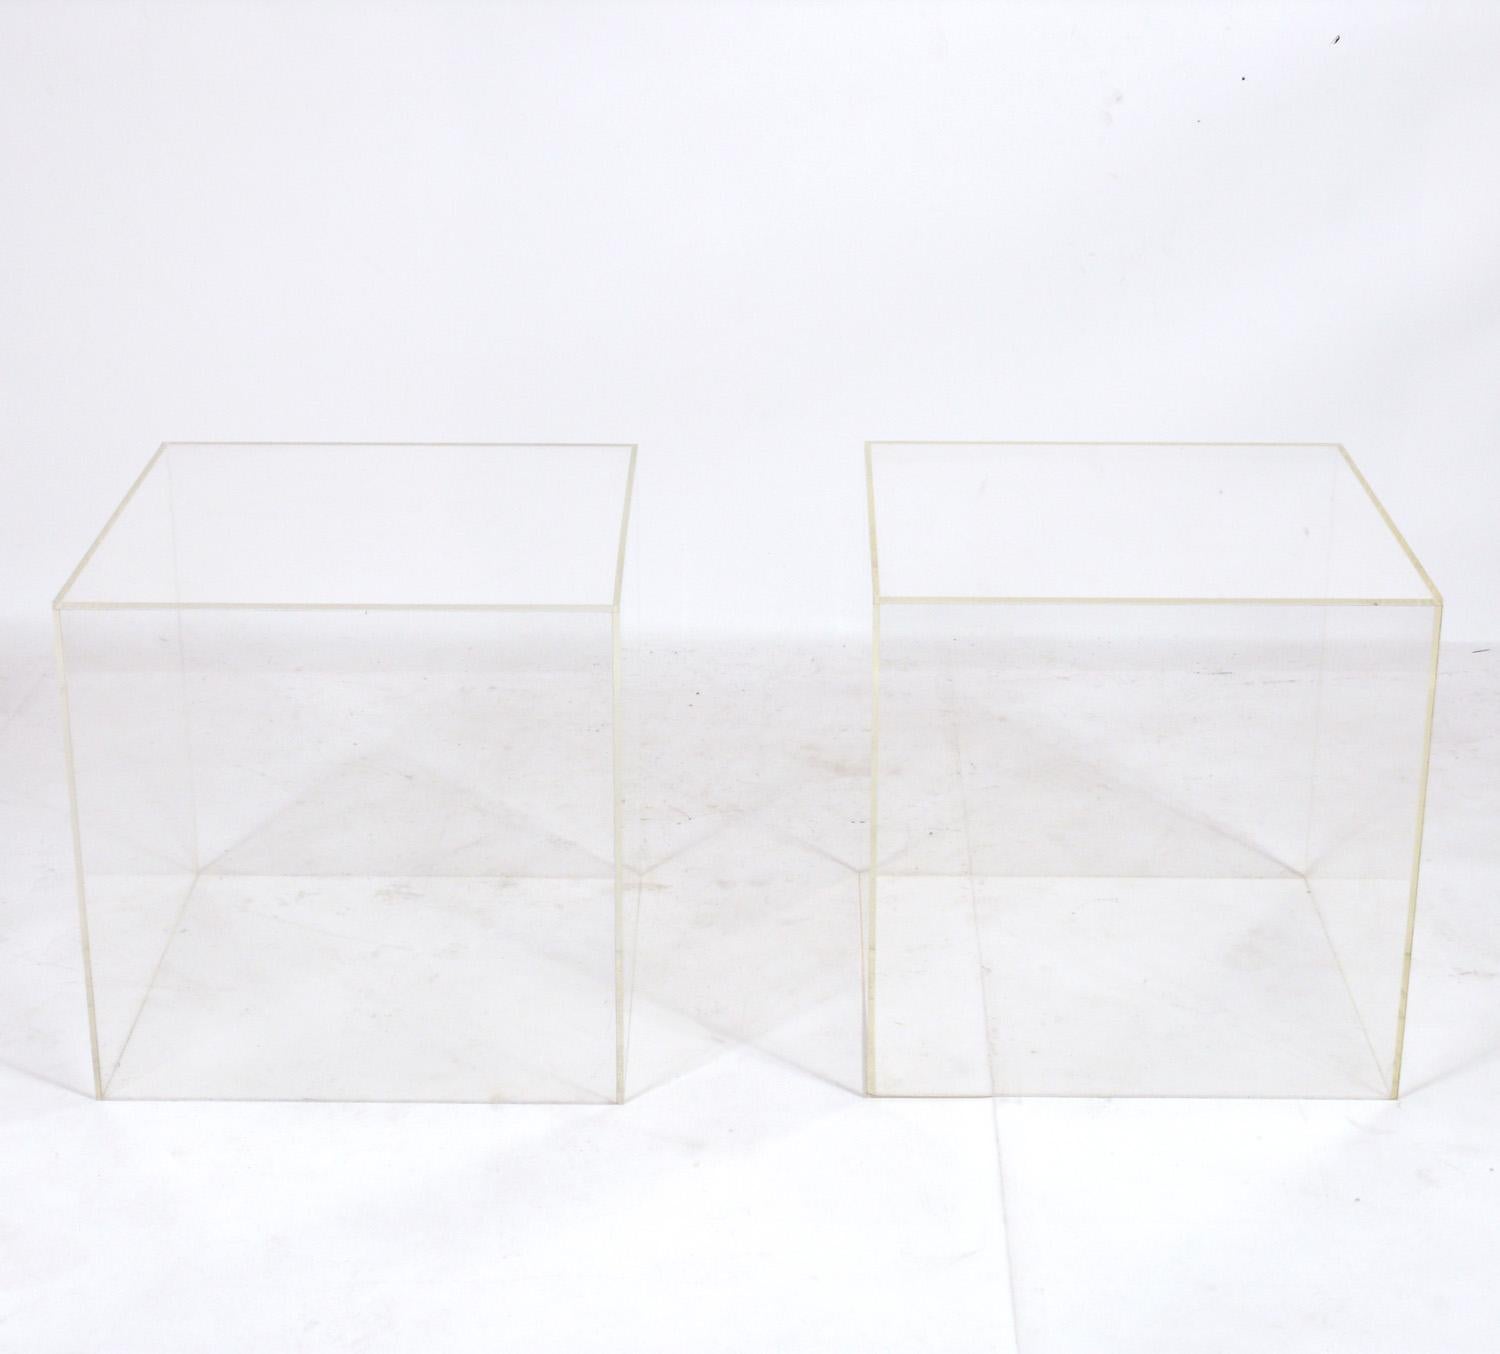 Pair of Acrylic or Lucite end or side tables, American, circa 1980s. They are a versatile size and can be used as end or side tables, or as night stands. They were made without a bottom panel, so you could display or store items underneath them.